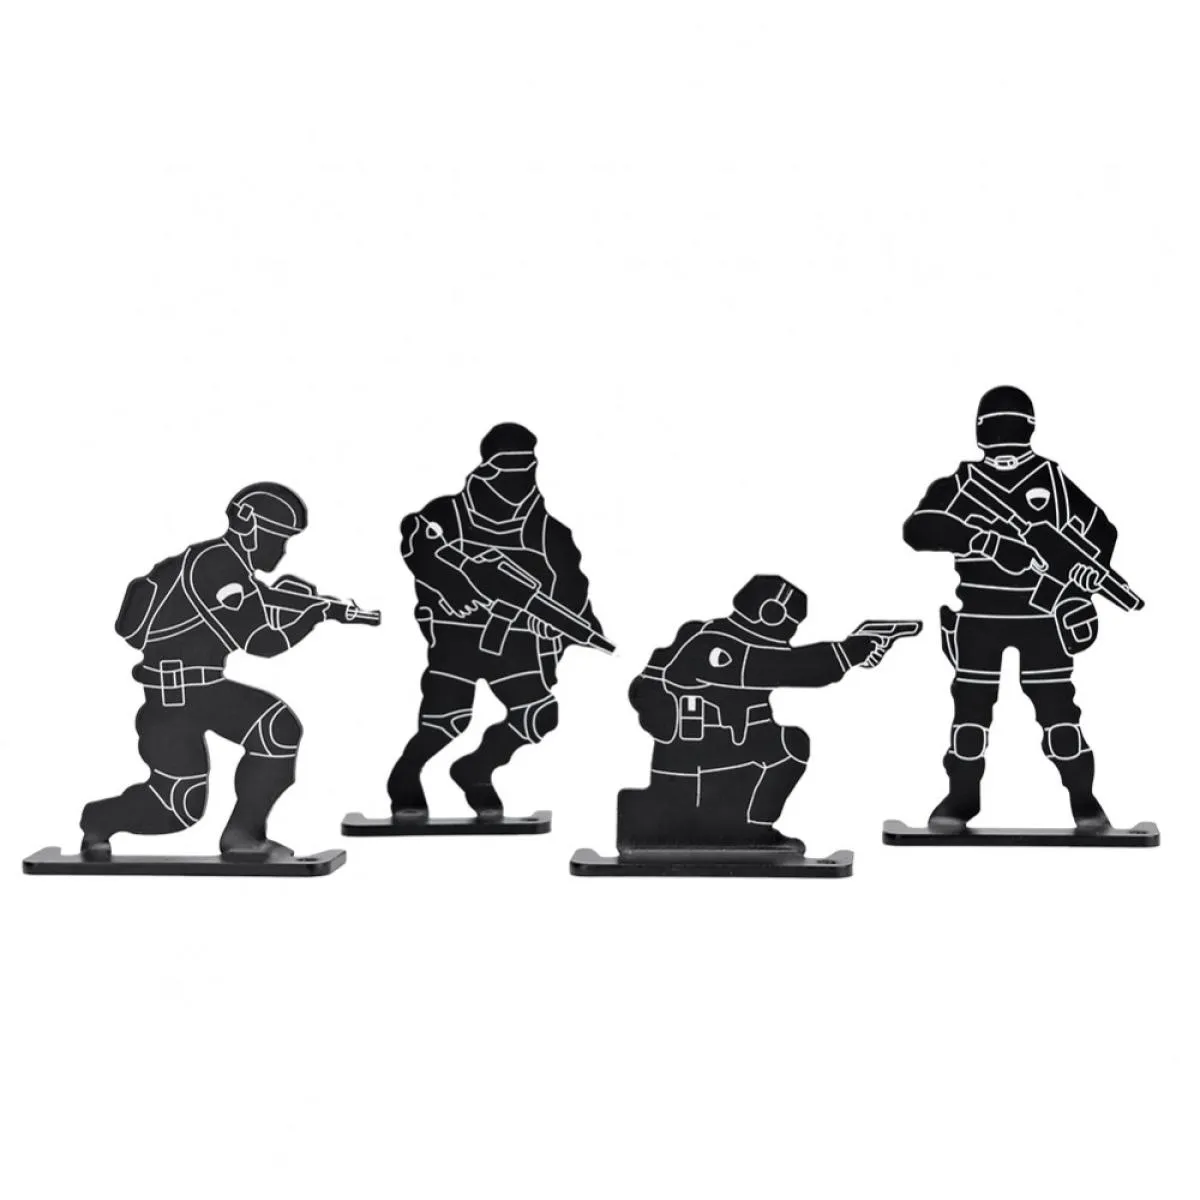 MINI TARGETS 4 PIECES STEEL Soldier